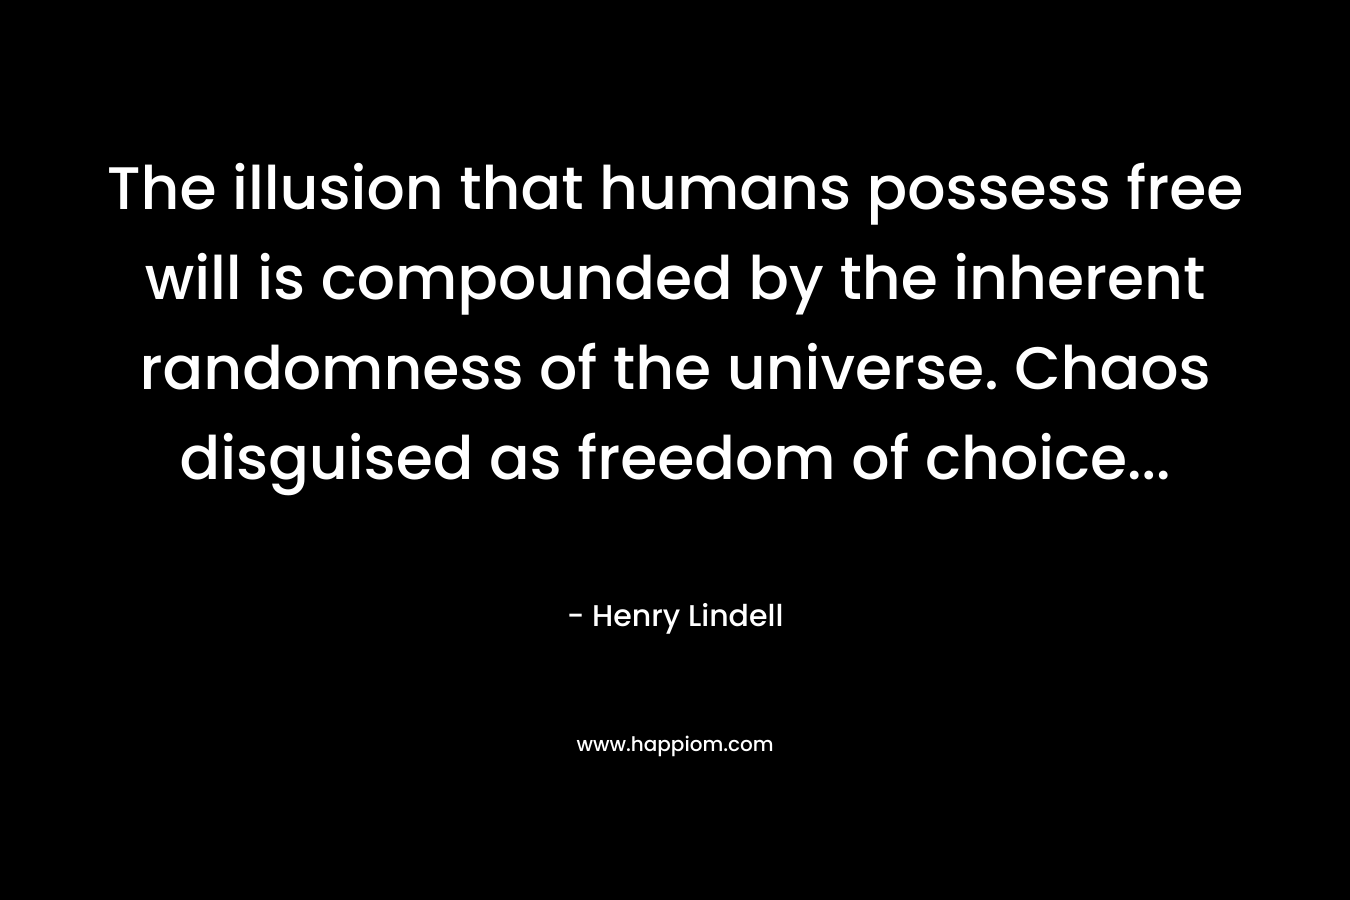 The illusion that humans possess free will is compounded by the inherent randomness of the universe. Chaos disguised as freedom of choice… – Henry Lindell